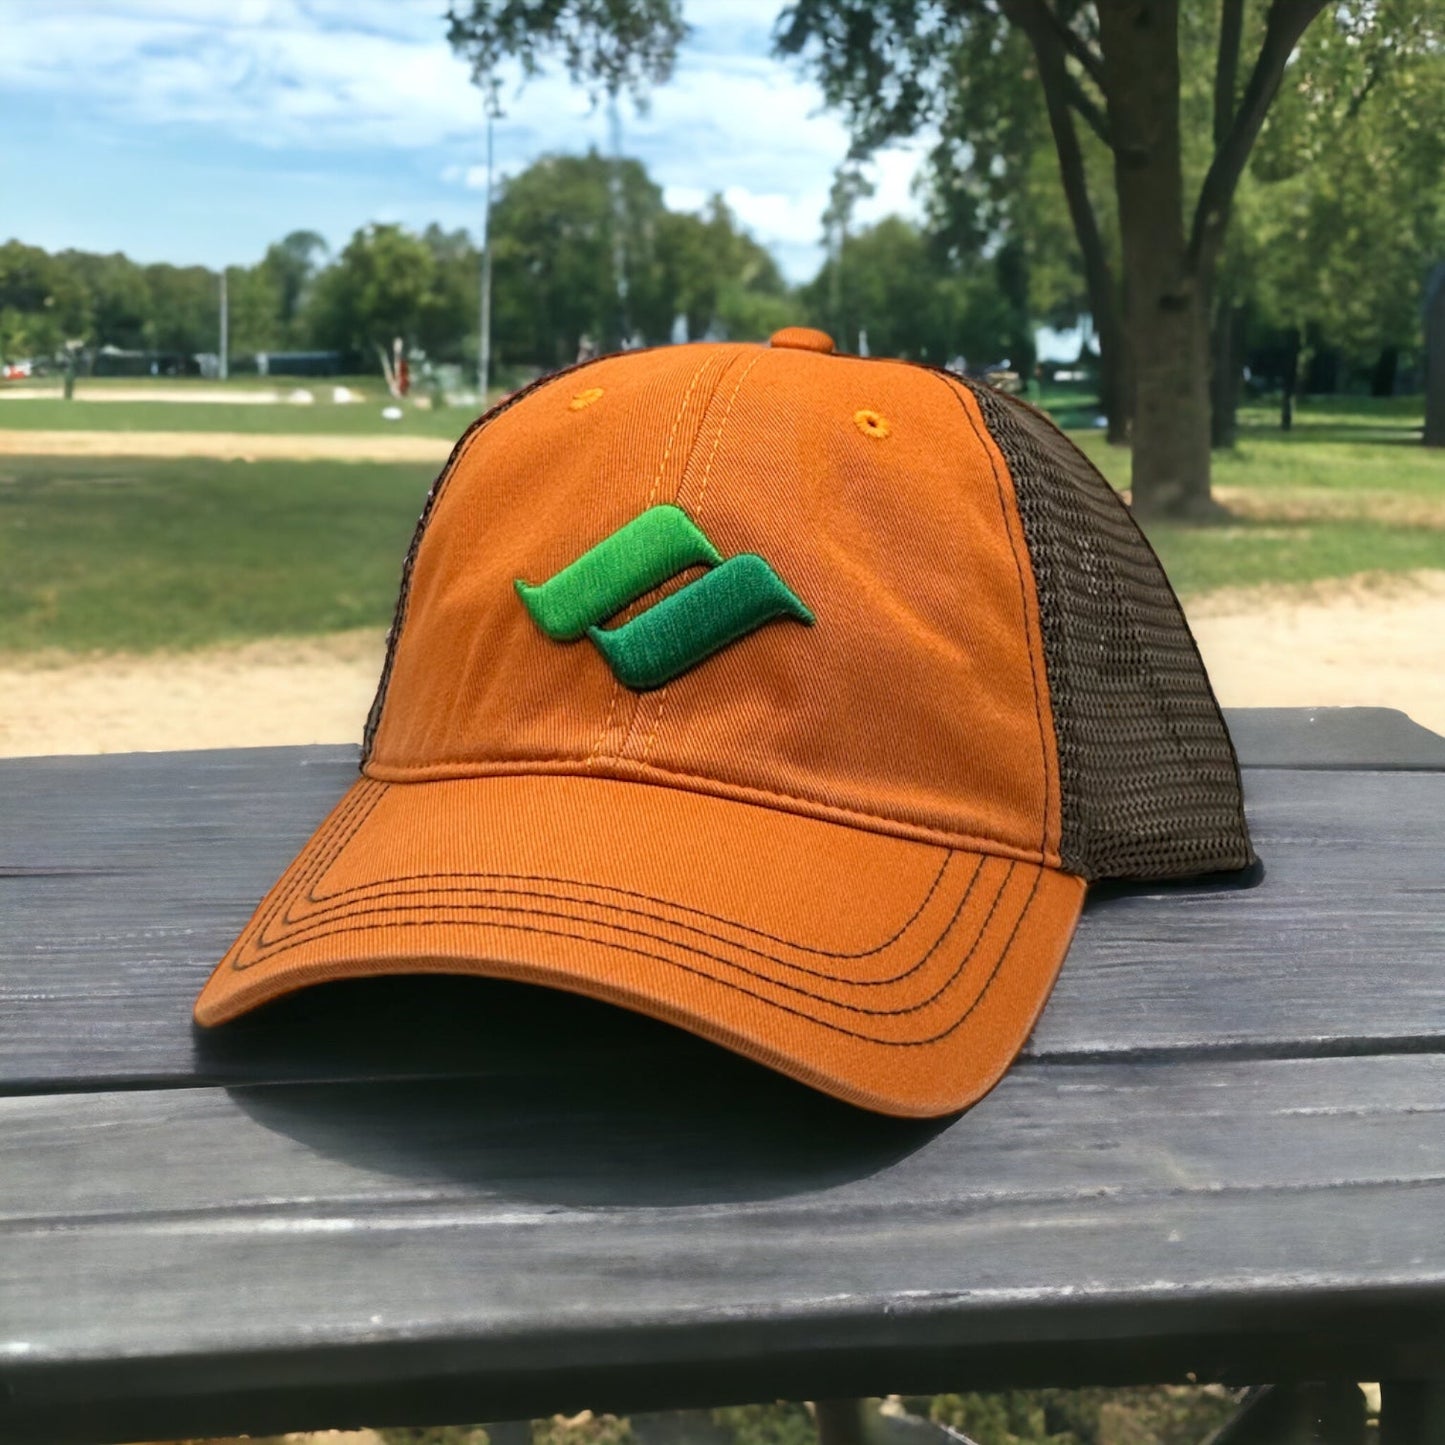 Orange hat with brown mesh back and green Snow Summit logo on the front